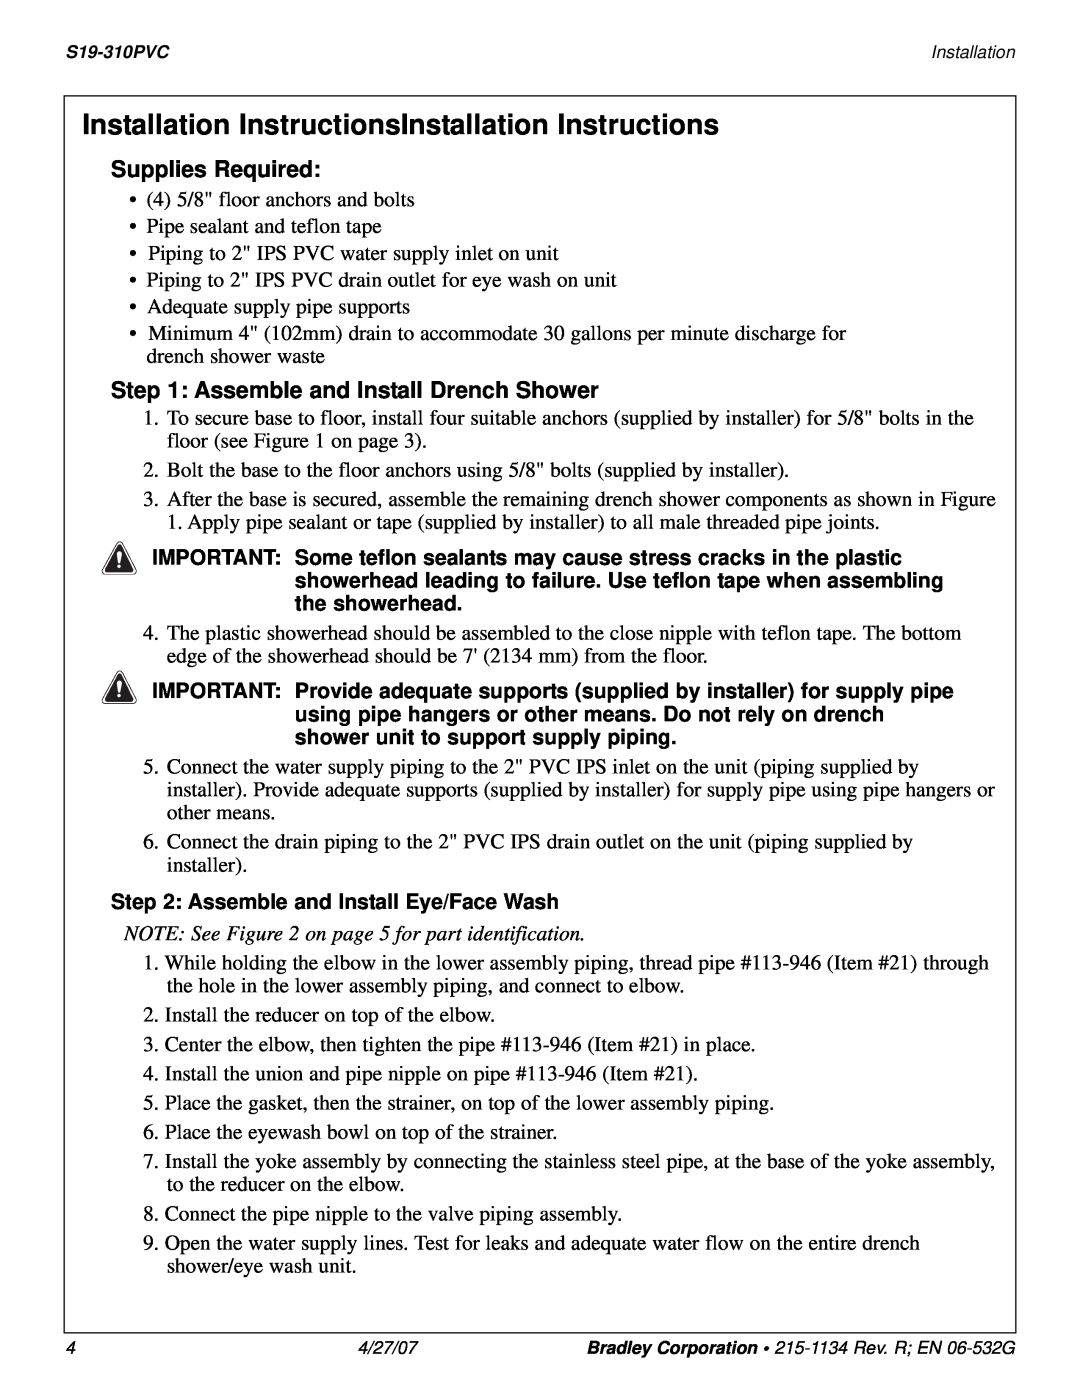 Bradley Smoker S19-310PVC installation instructions Installation InstructionsInstallation Instructions, Supplies Required 